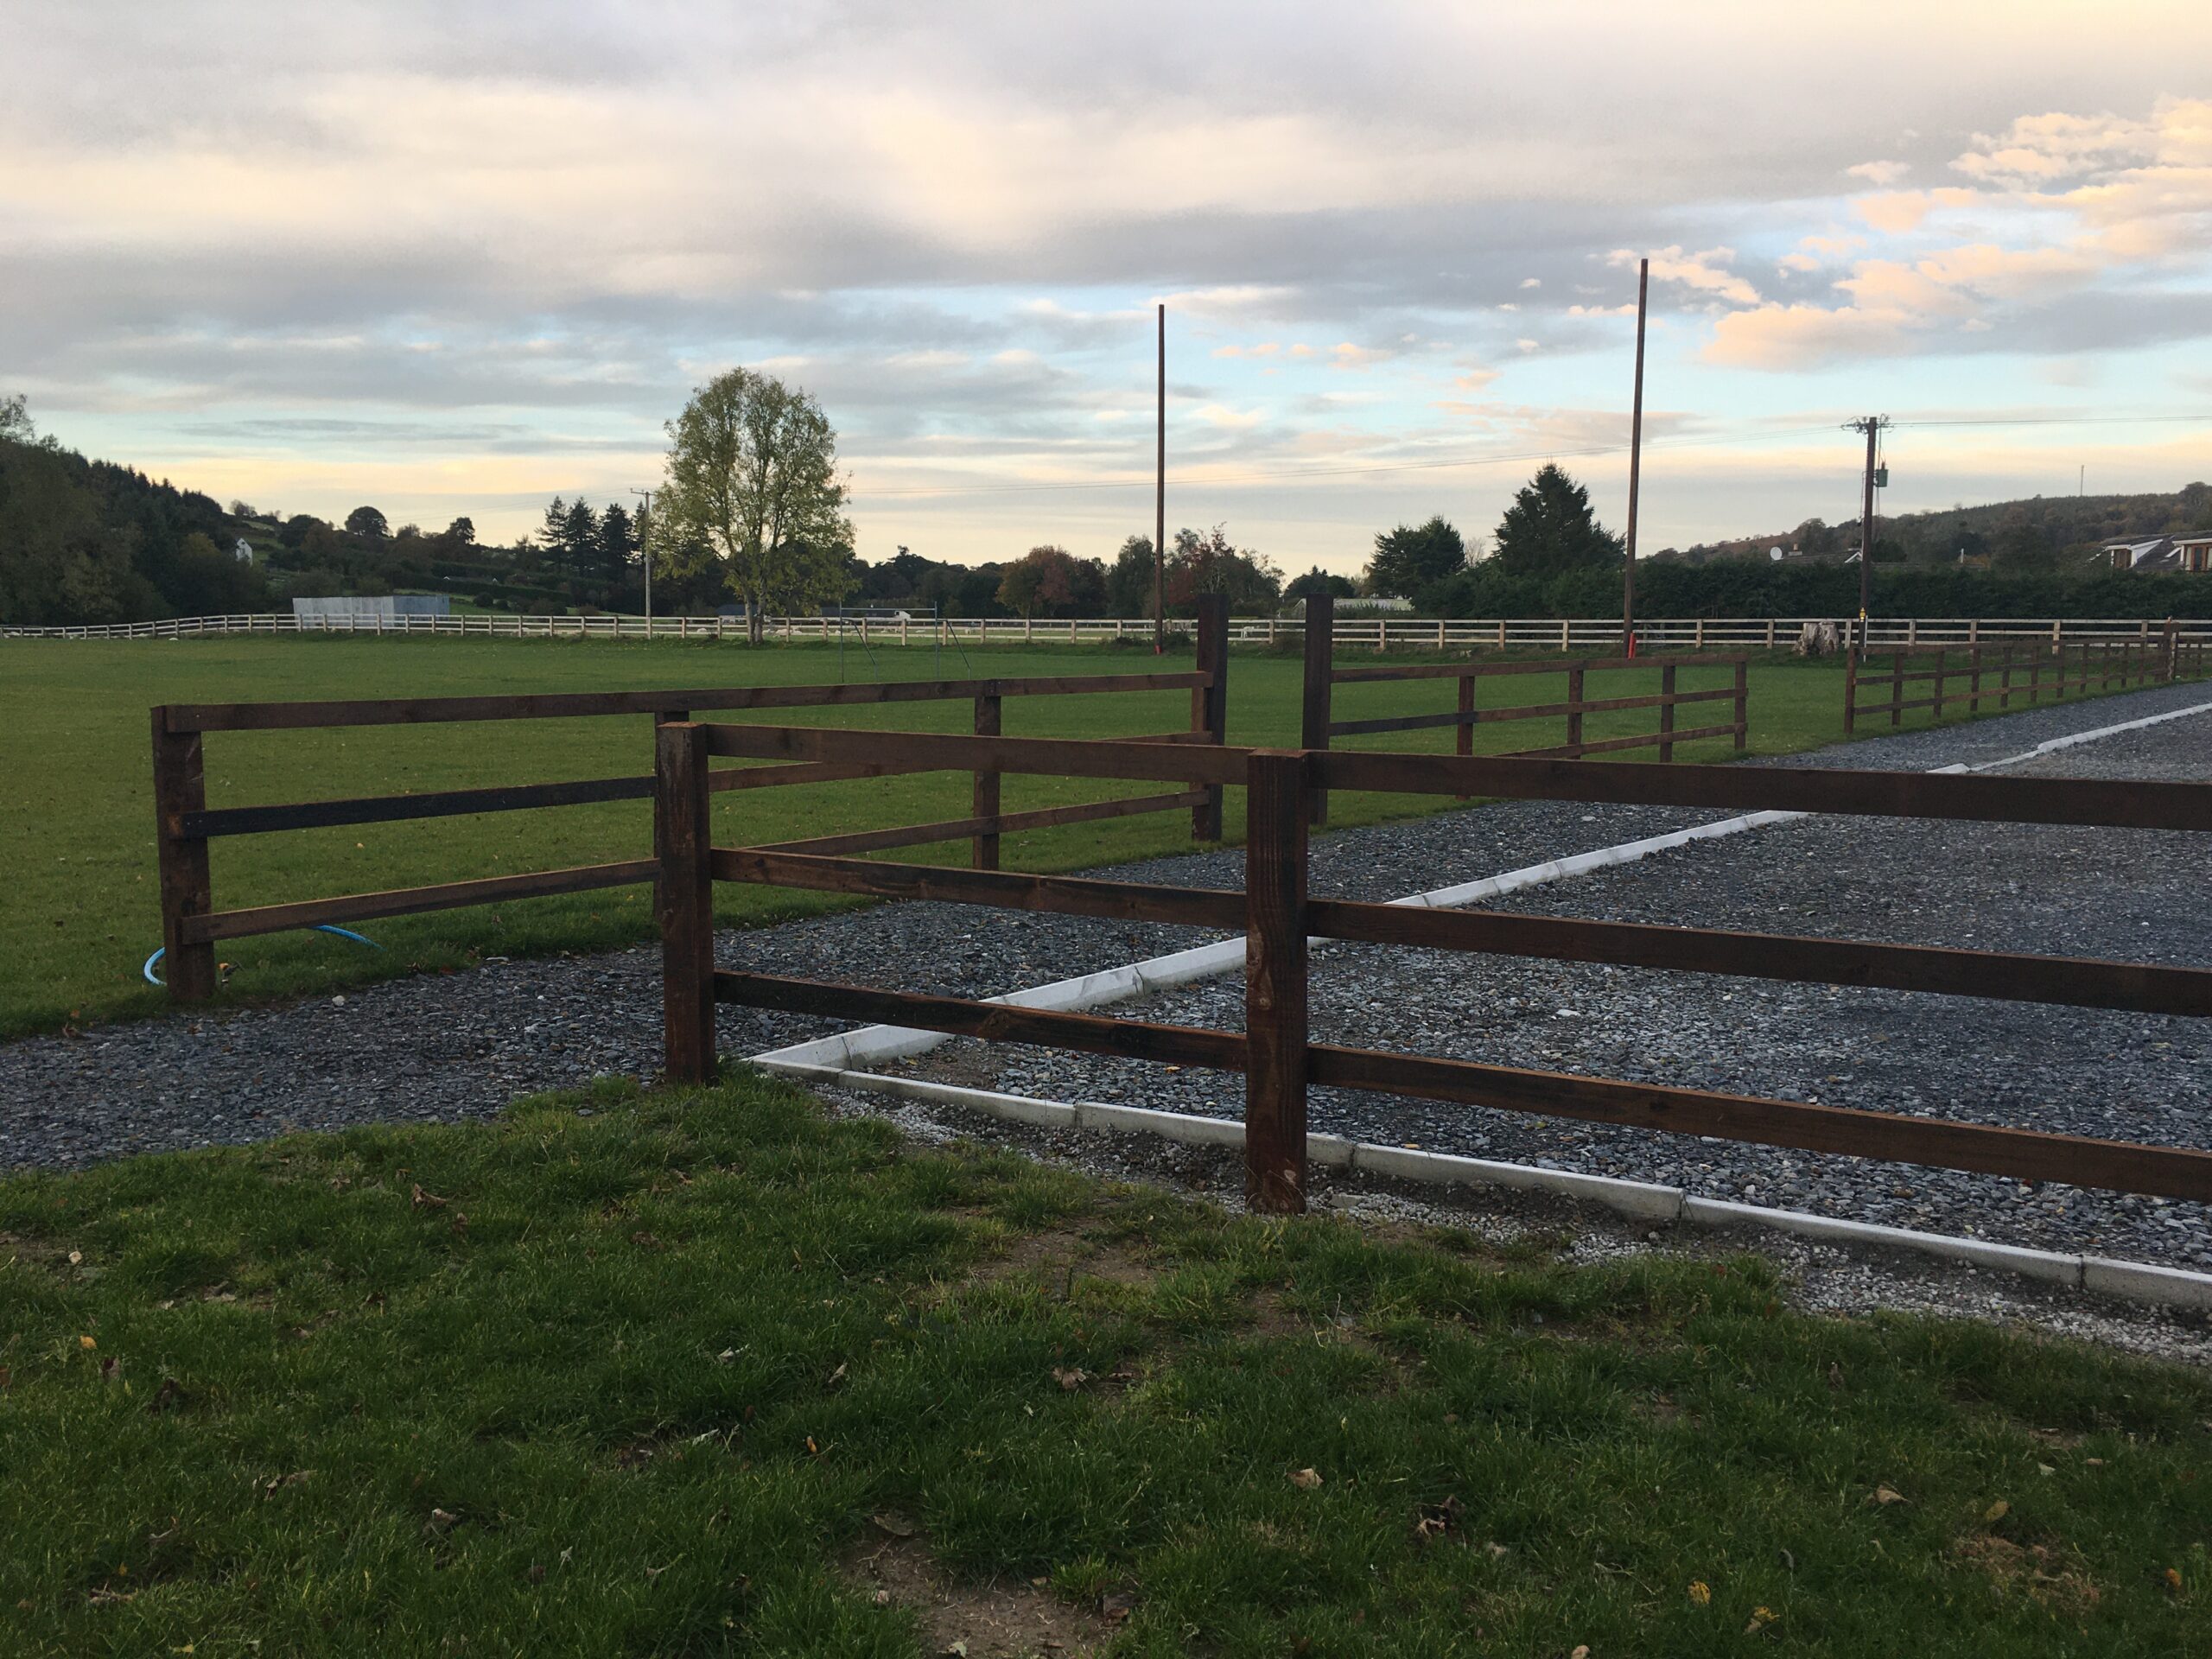 And the Club Car Park has just been fenced by Tommy Dwyer of Donard fame.  Thanks Tommy, great job.